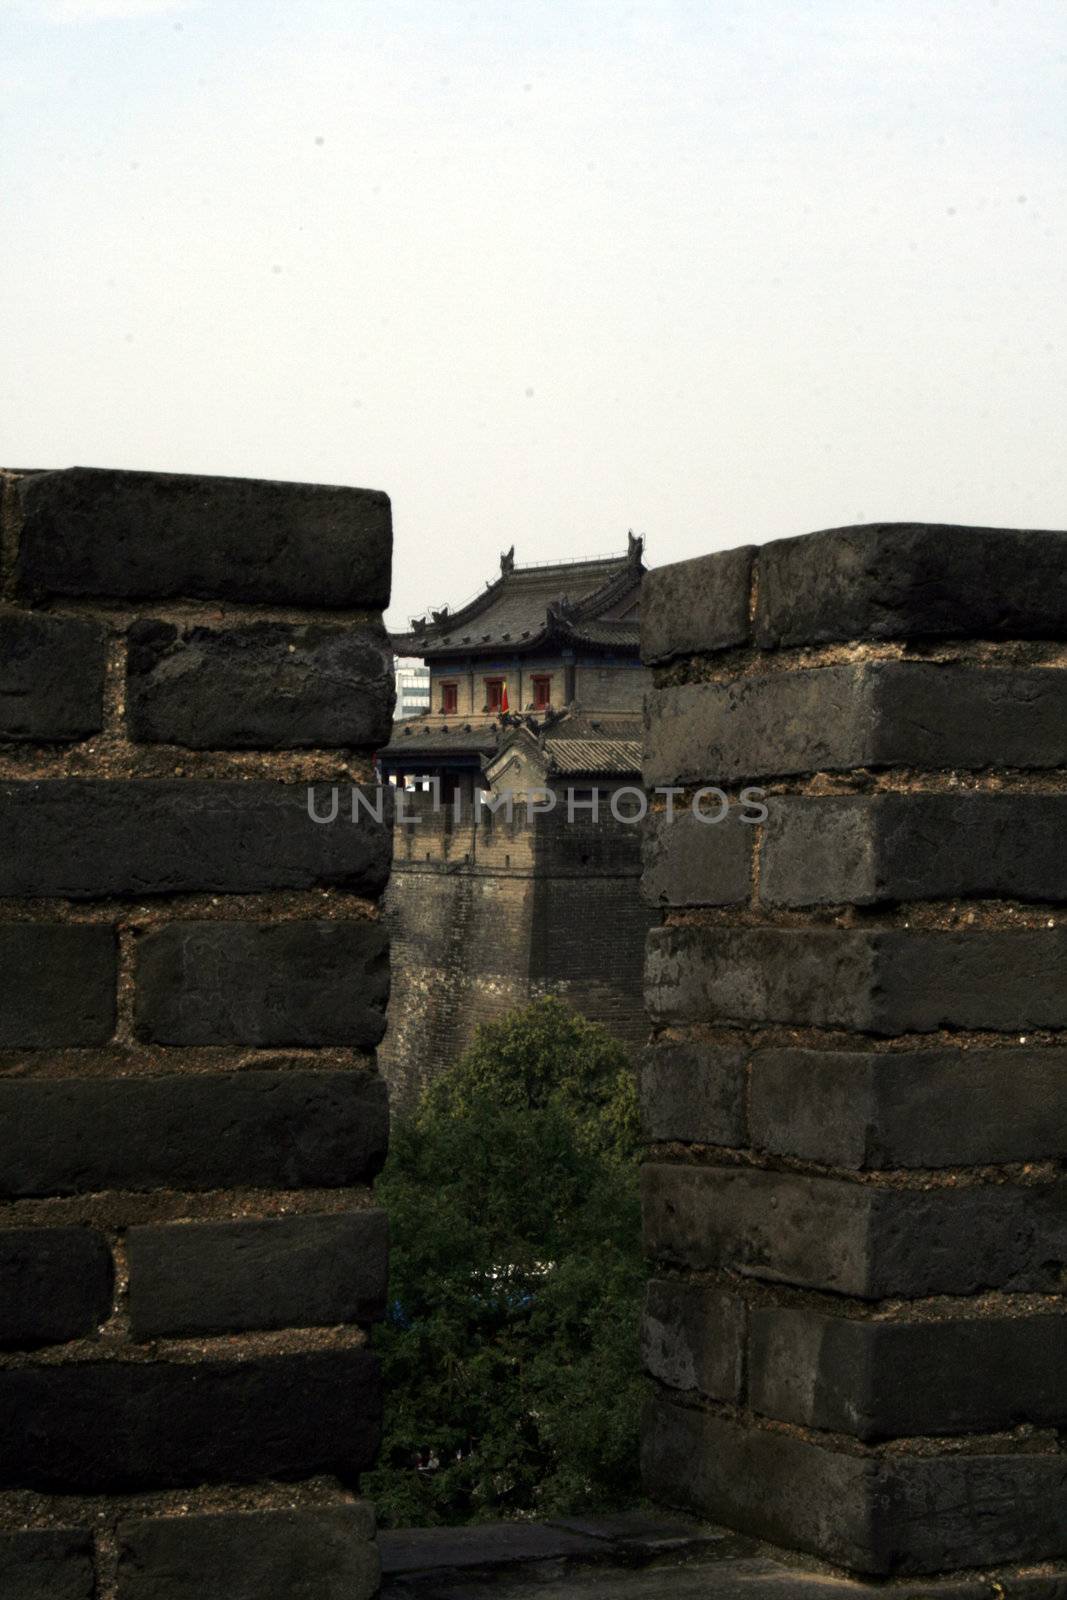 downtown of Xian, View by two pinnacles on a build by koep